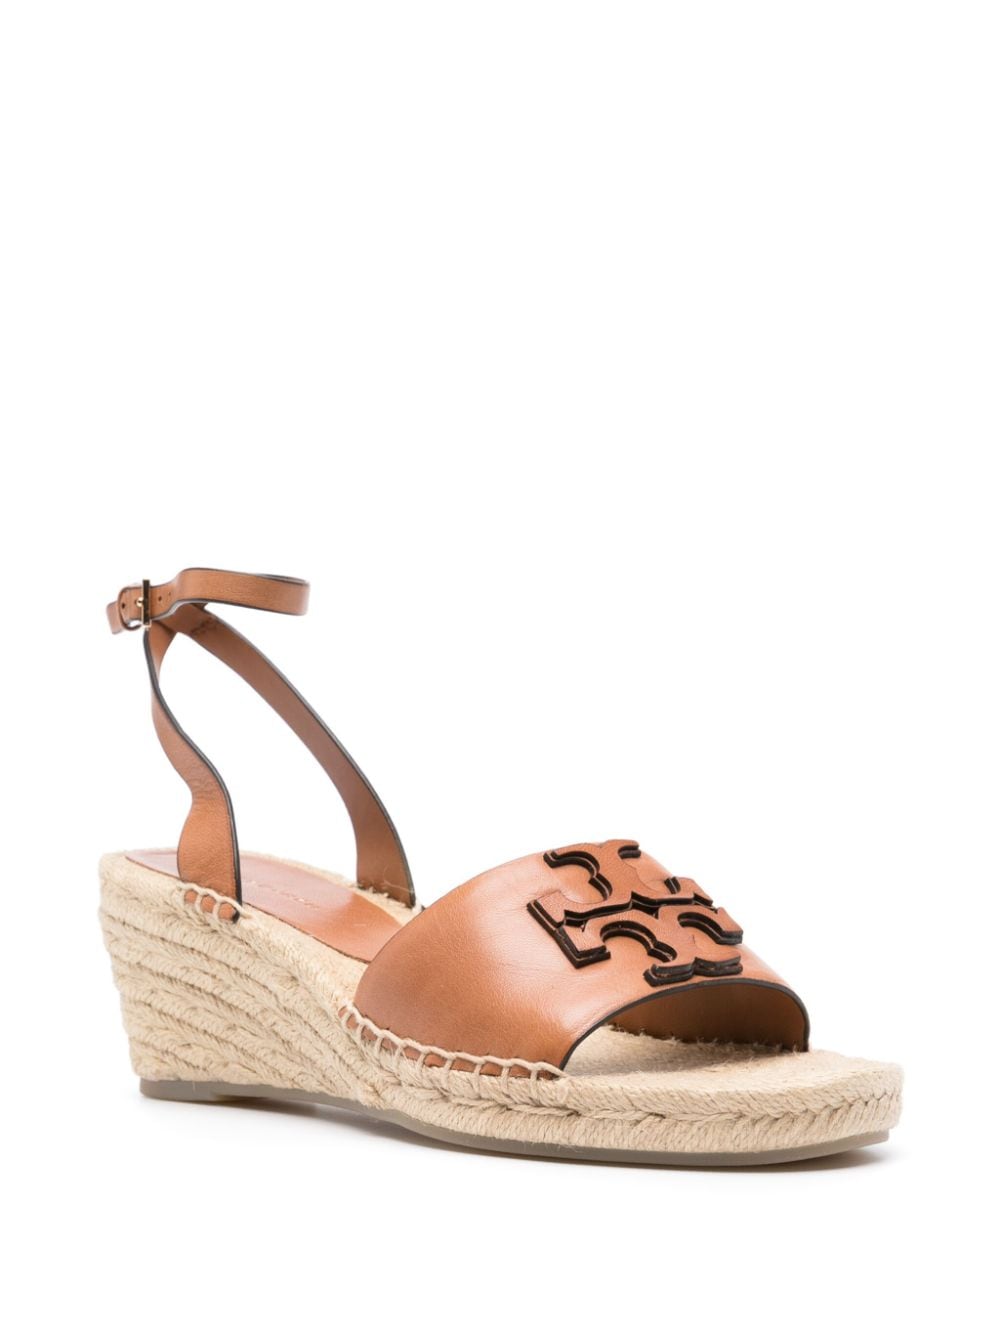 Tory Burch Ines 65mm leather espadrilles - Bruin